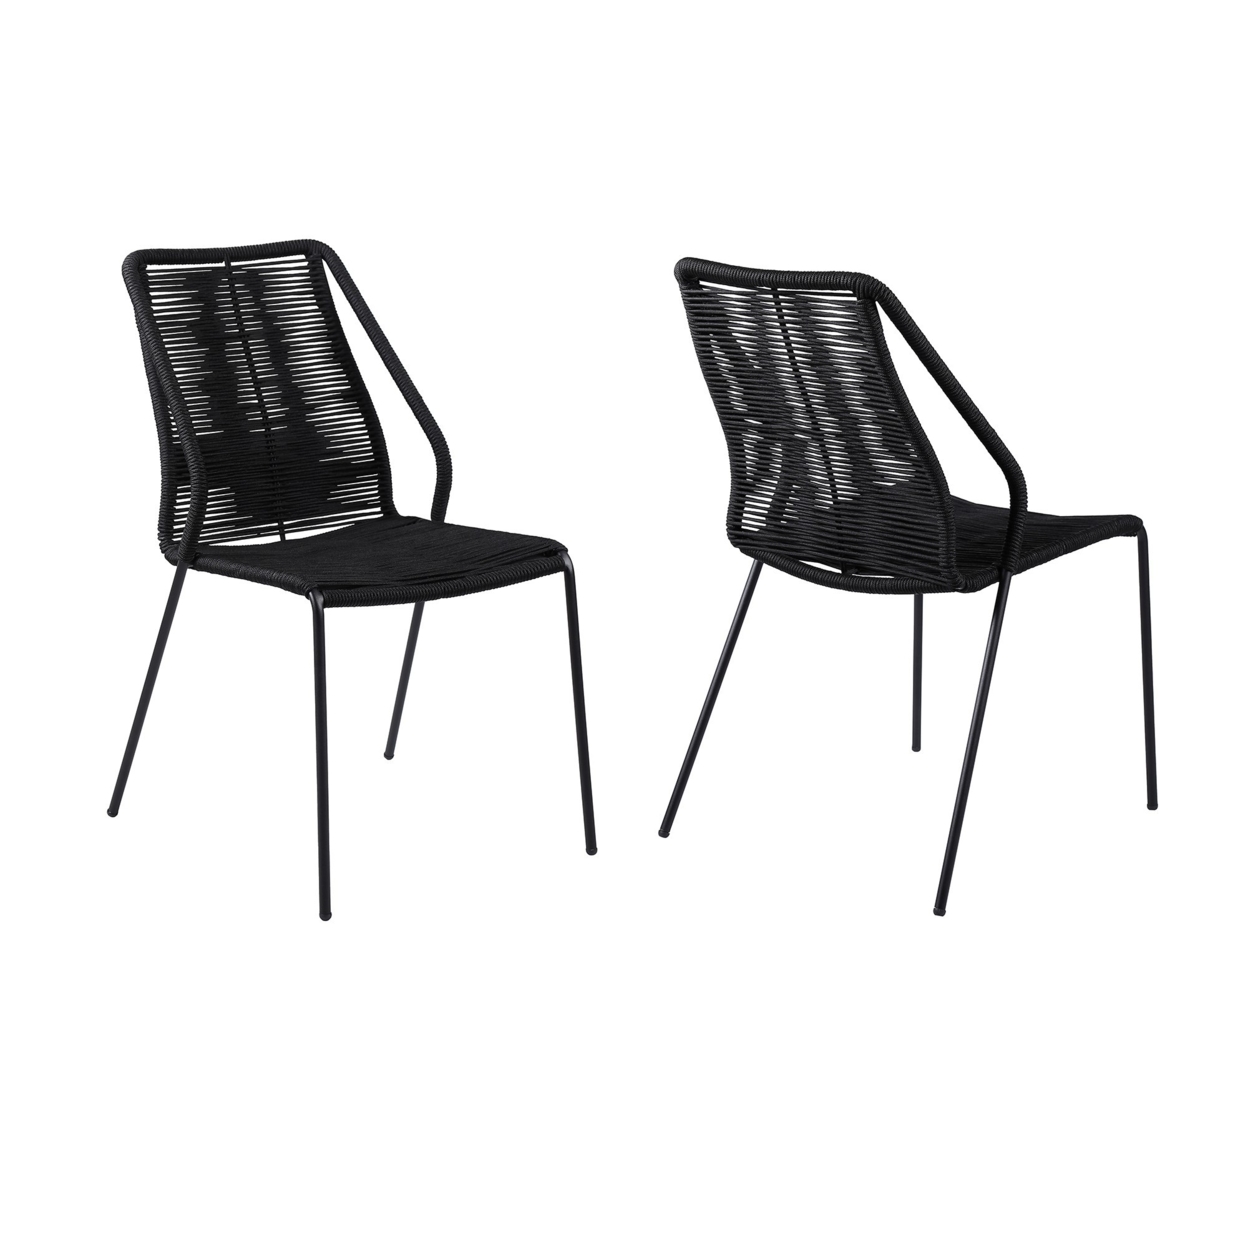 Indoor Outdoor Dining Chair With Fishbone Woven Seating, Set Of 2, Black- Saltoro Sherpi